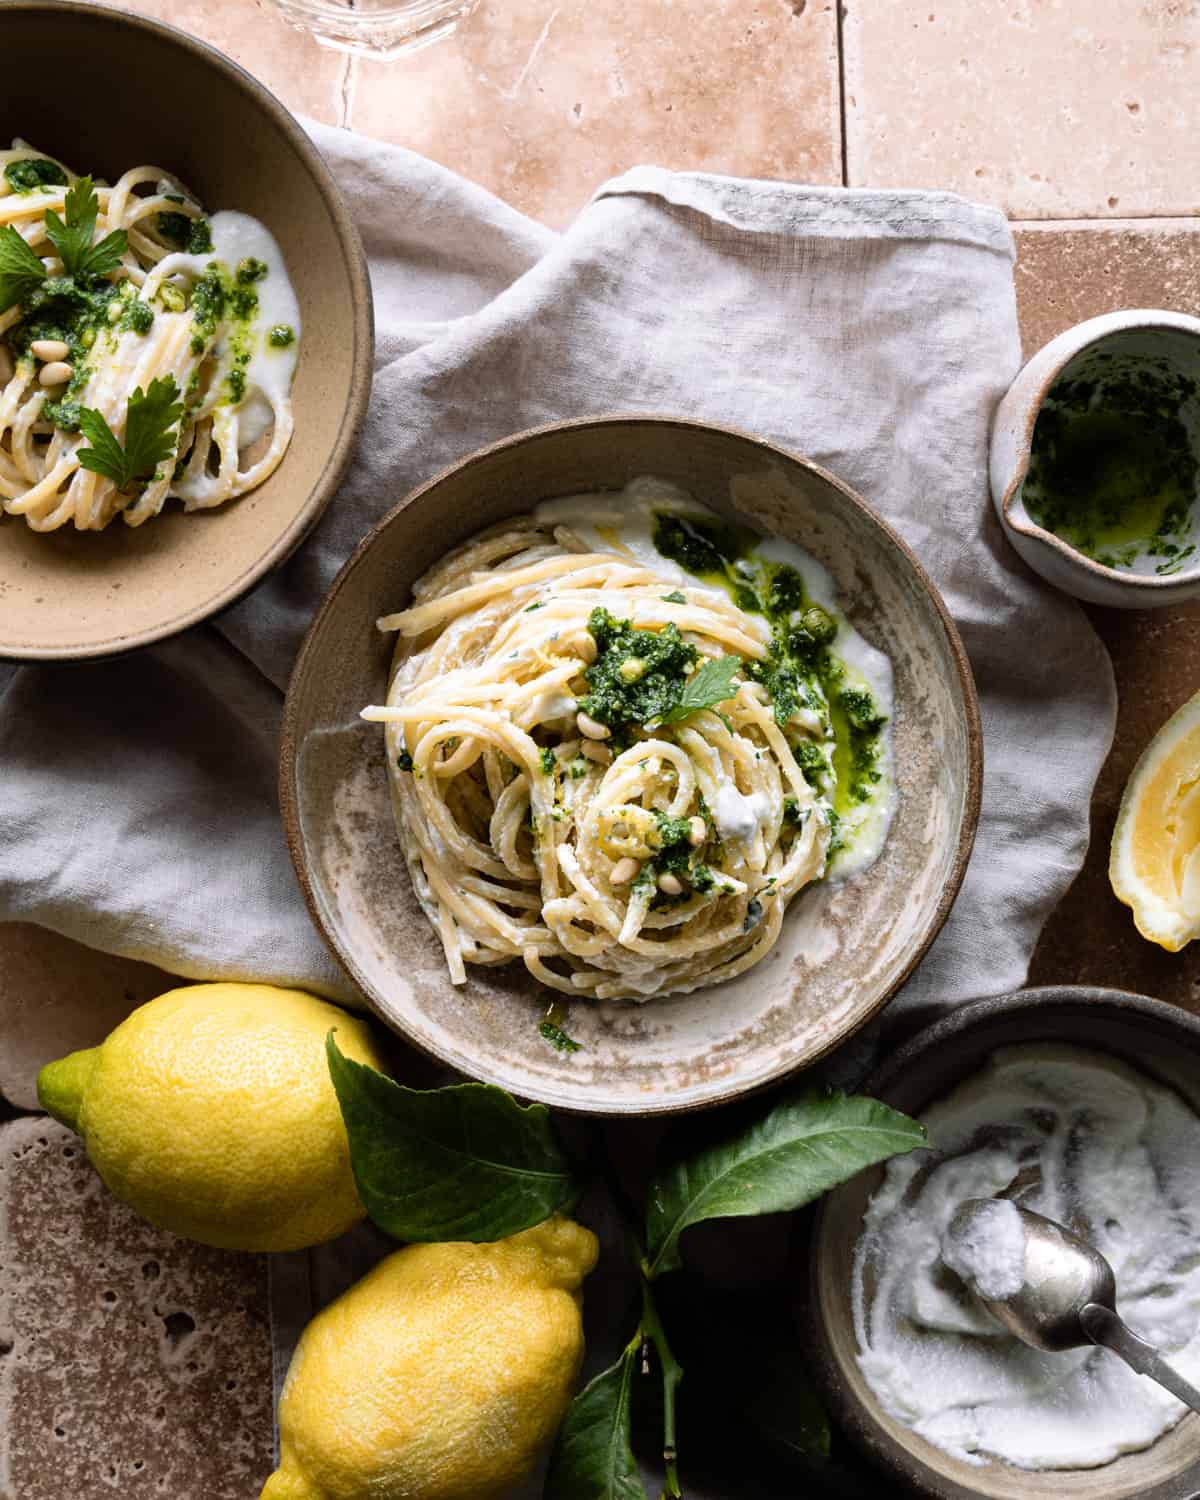 Pasta with ricotta and parsley pesto on two bowls on a kitchen towels near two lemons.  